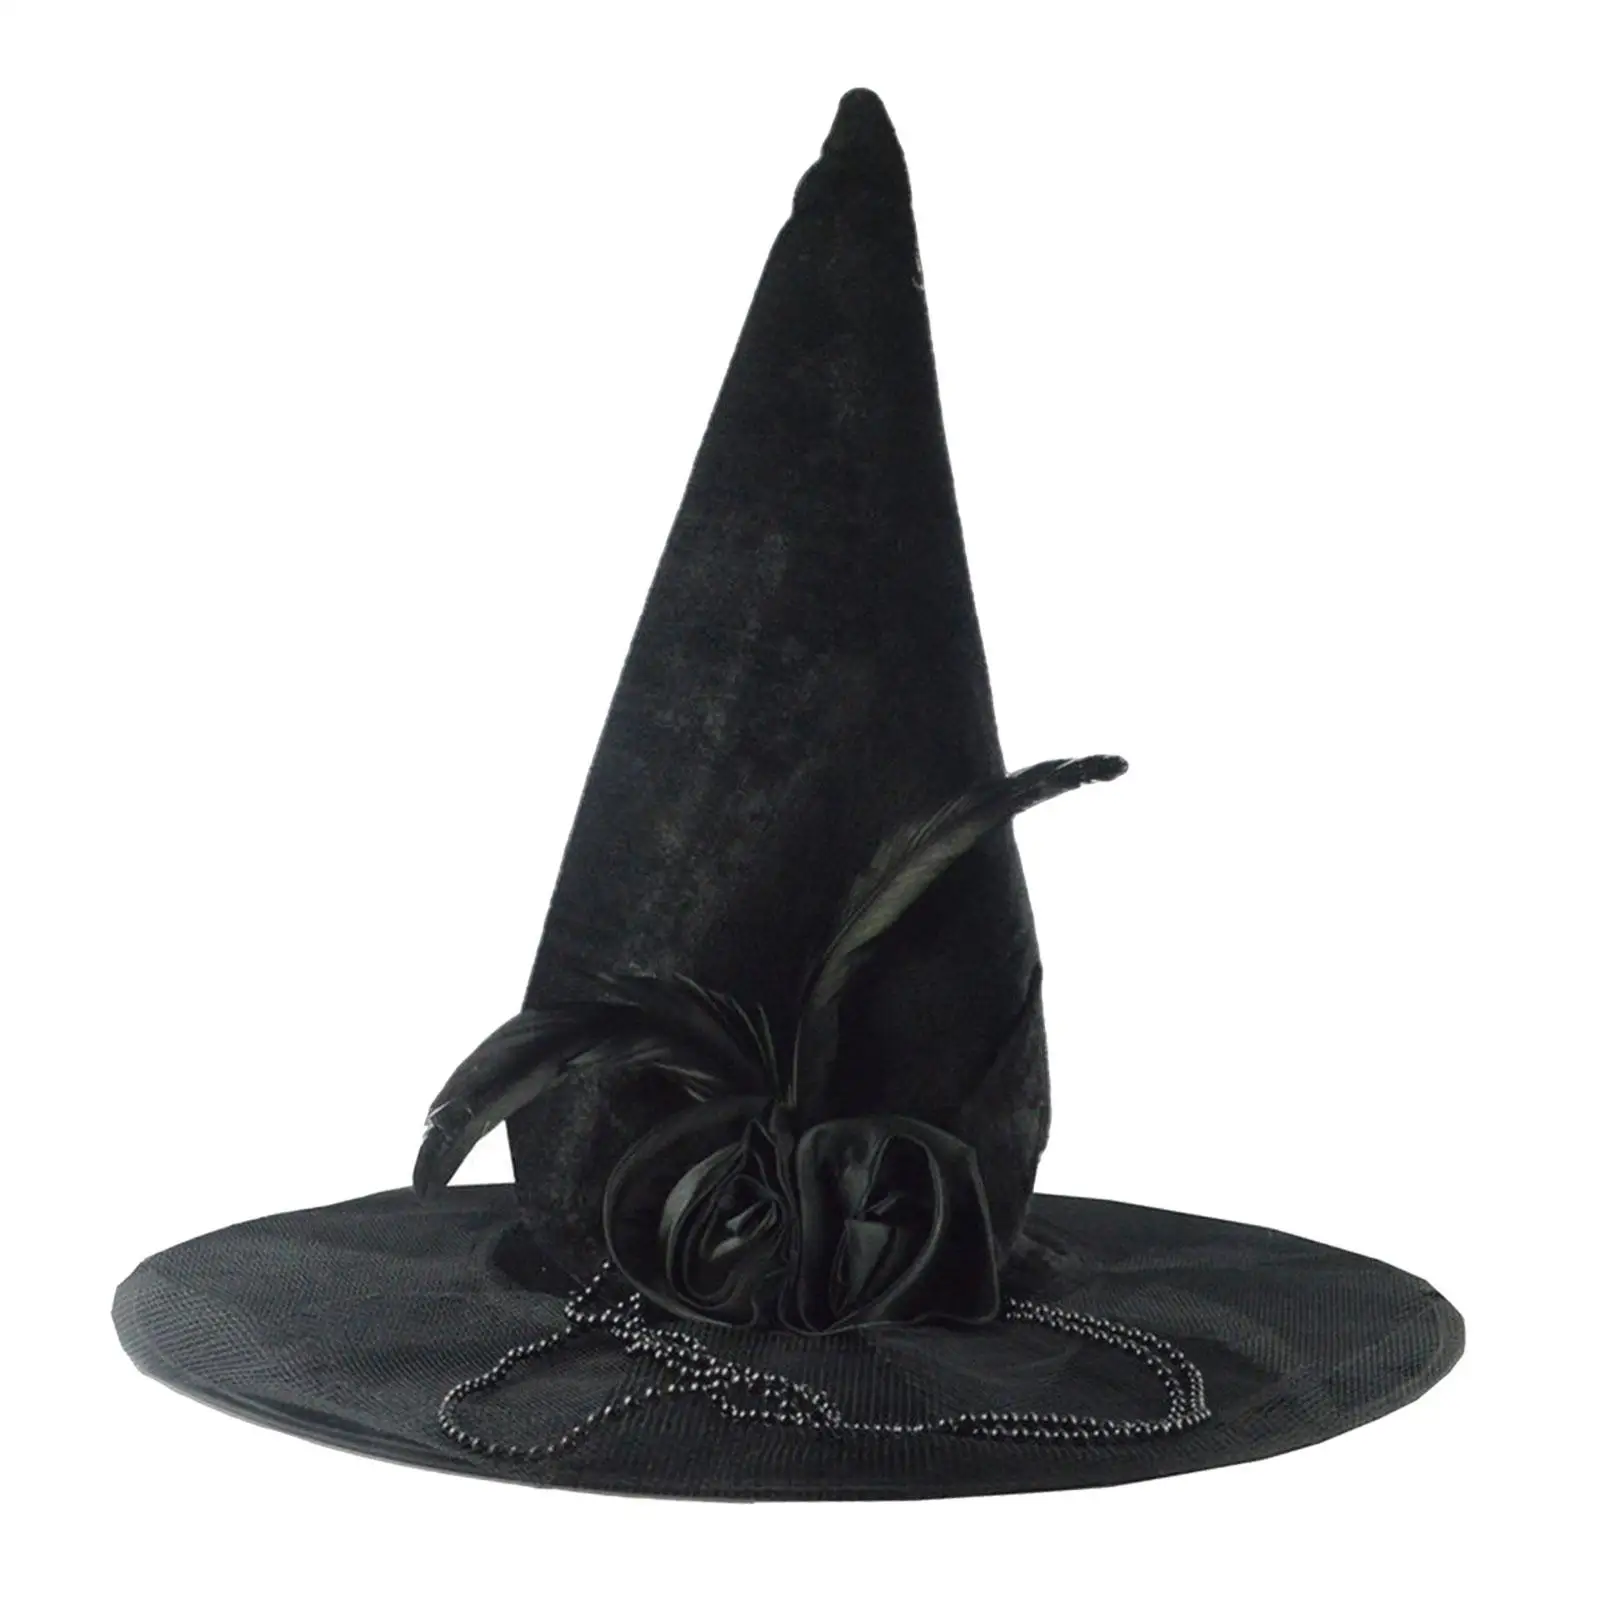 Halloween Witch Hat Novelty Black Women Decorative Pointed Top Hat for Fancy Dress Party Stage Performance Photo Props